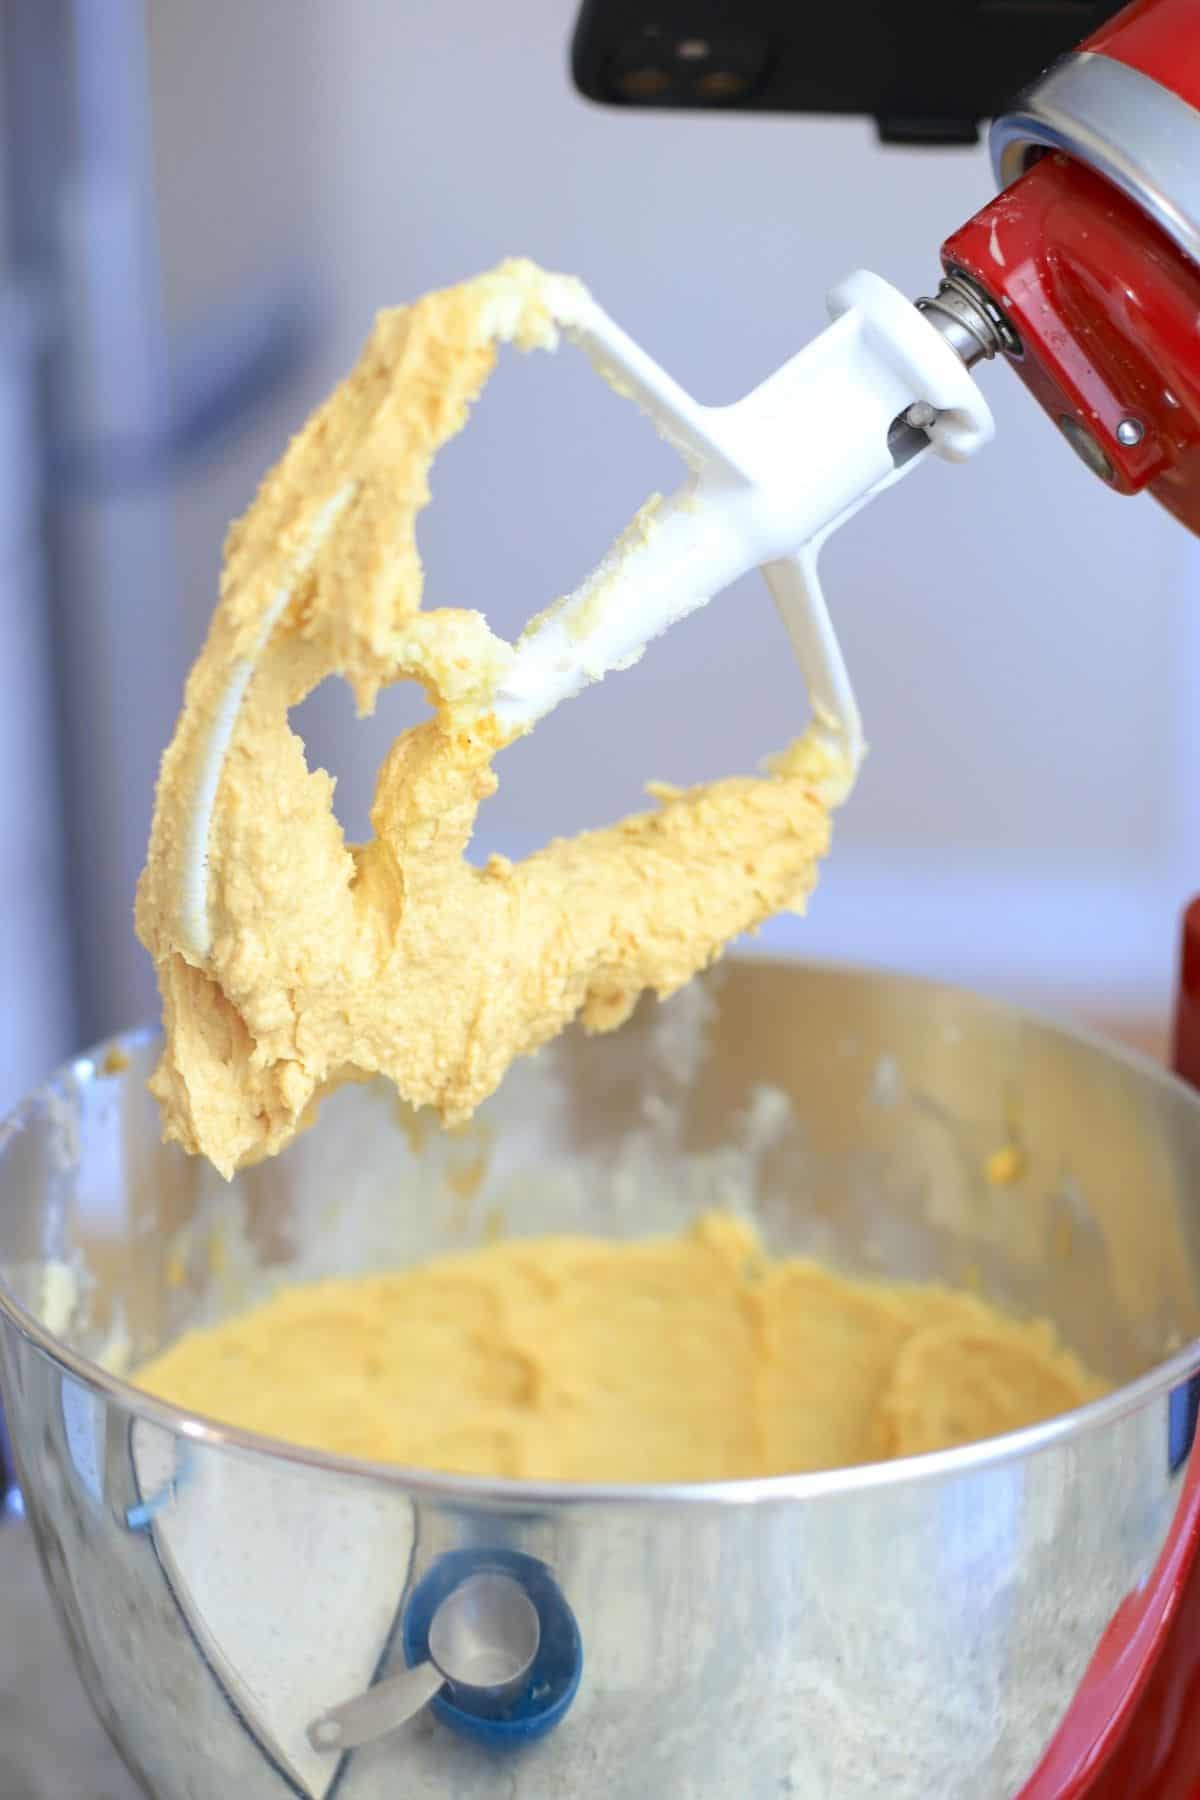 stand mixer with paddle full of cookie dough batter.